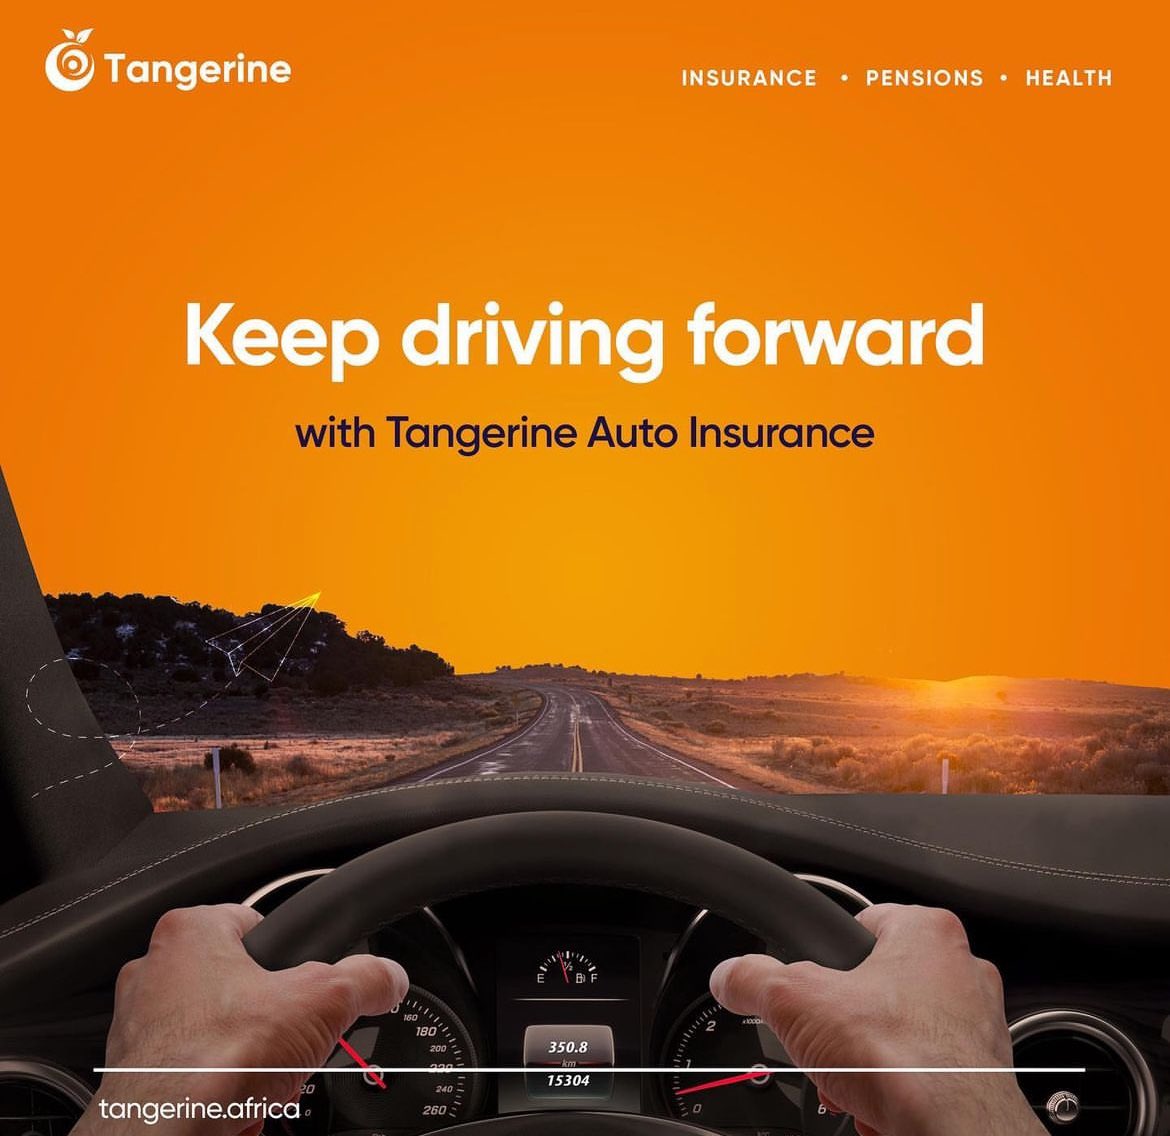 Auto insurance that truly protects you and your car.

Click on the link in bio to get a quote.

#autoinsurance #coverforallthatmatters #tangerineafrica #carinsurance